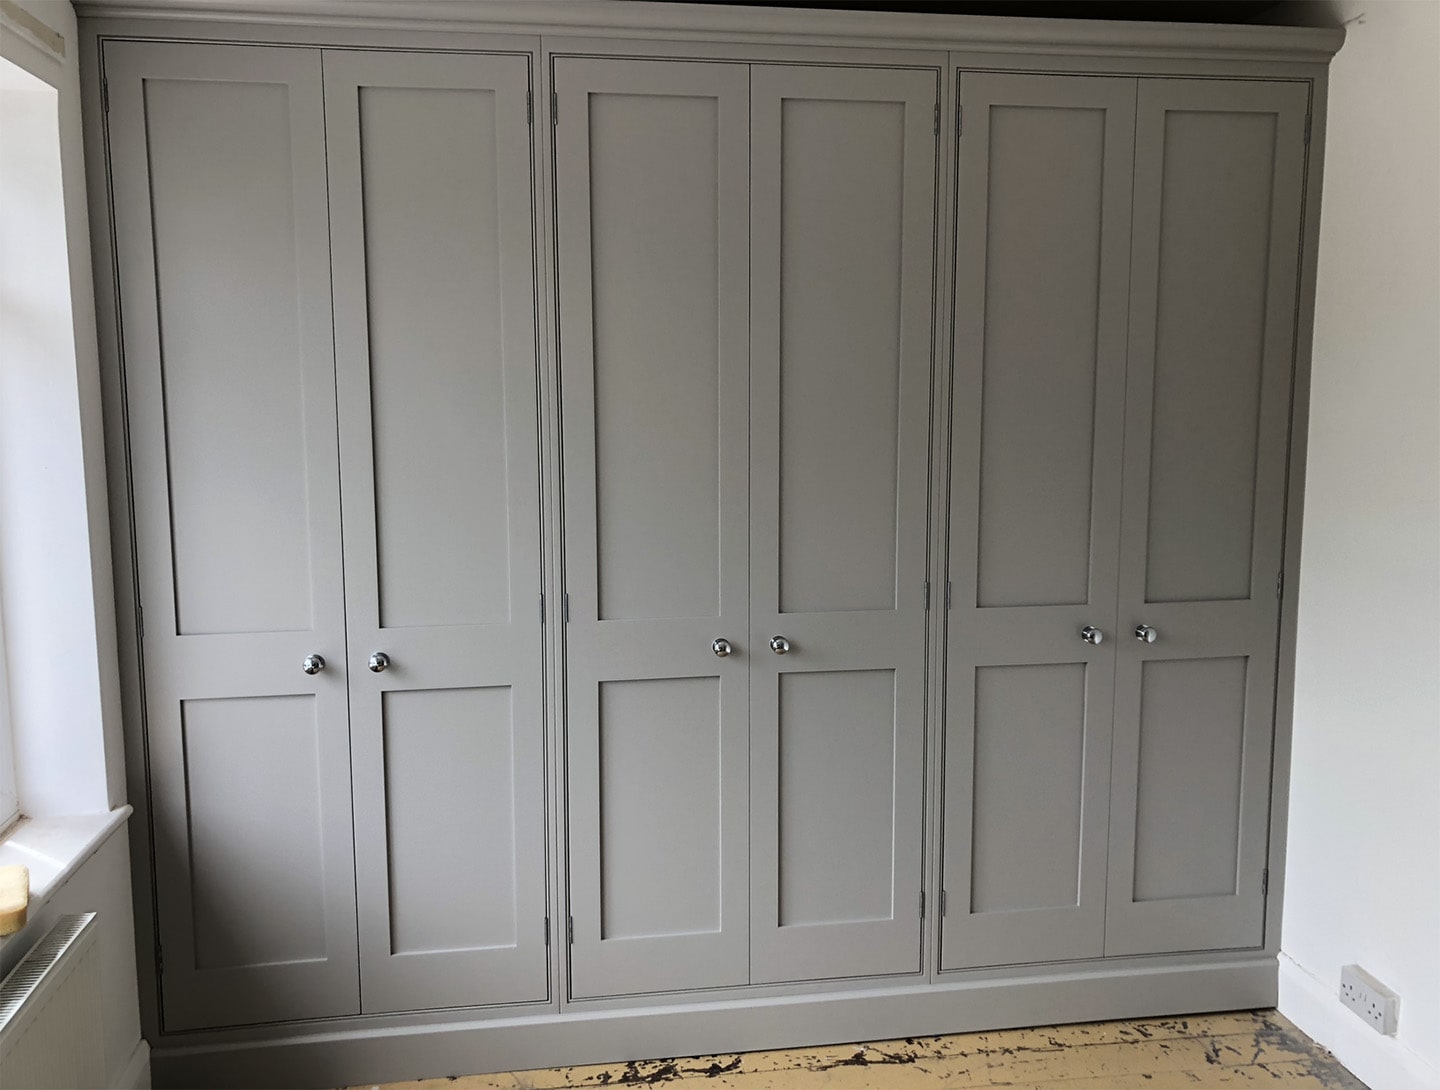 A collection of bespoke wardrobes